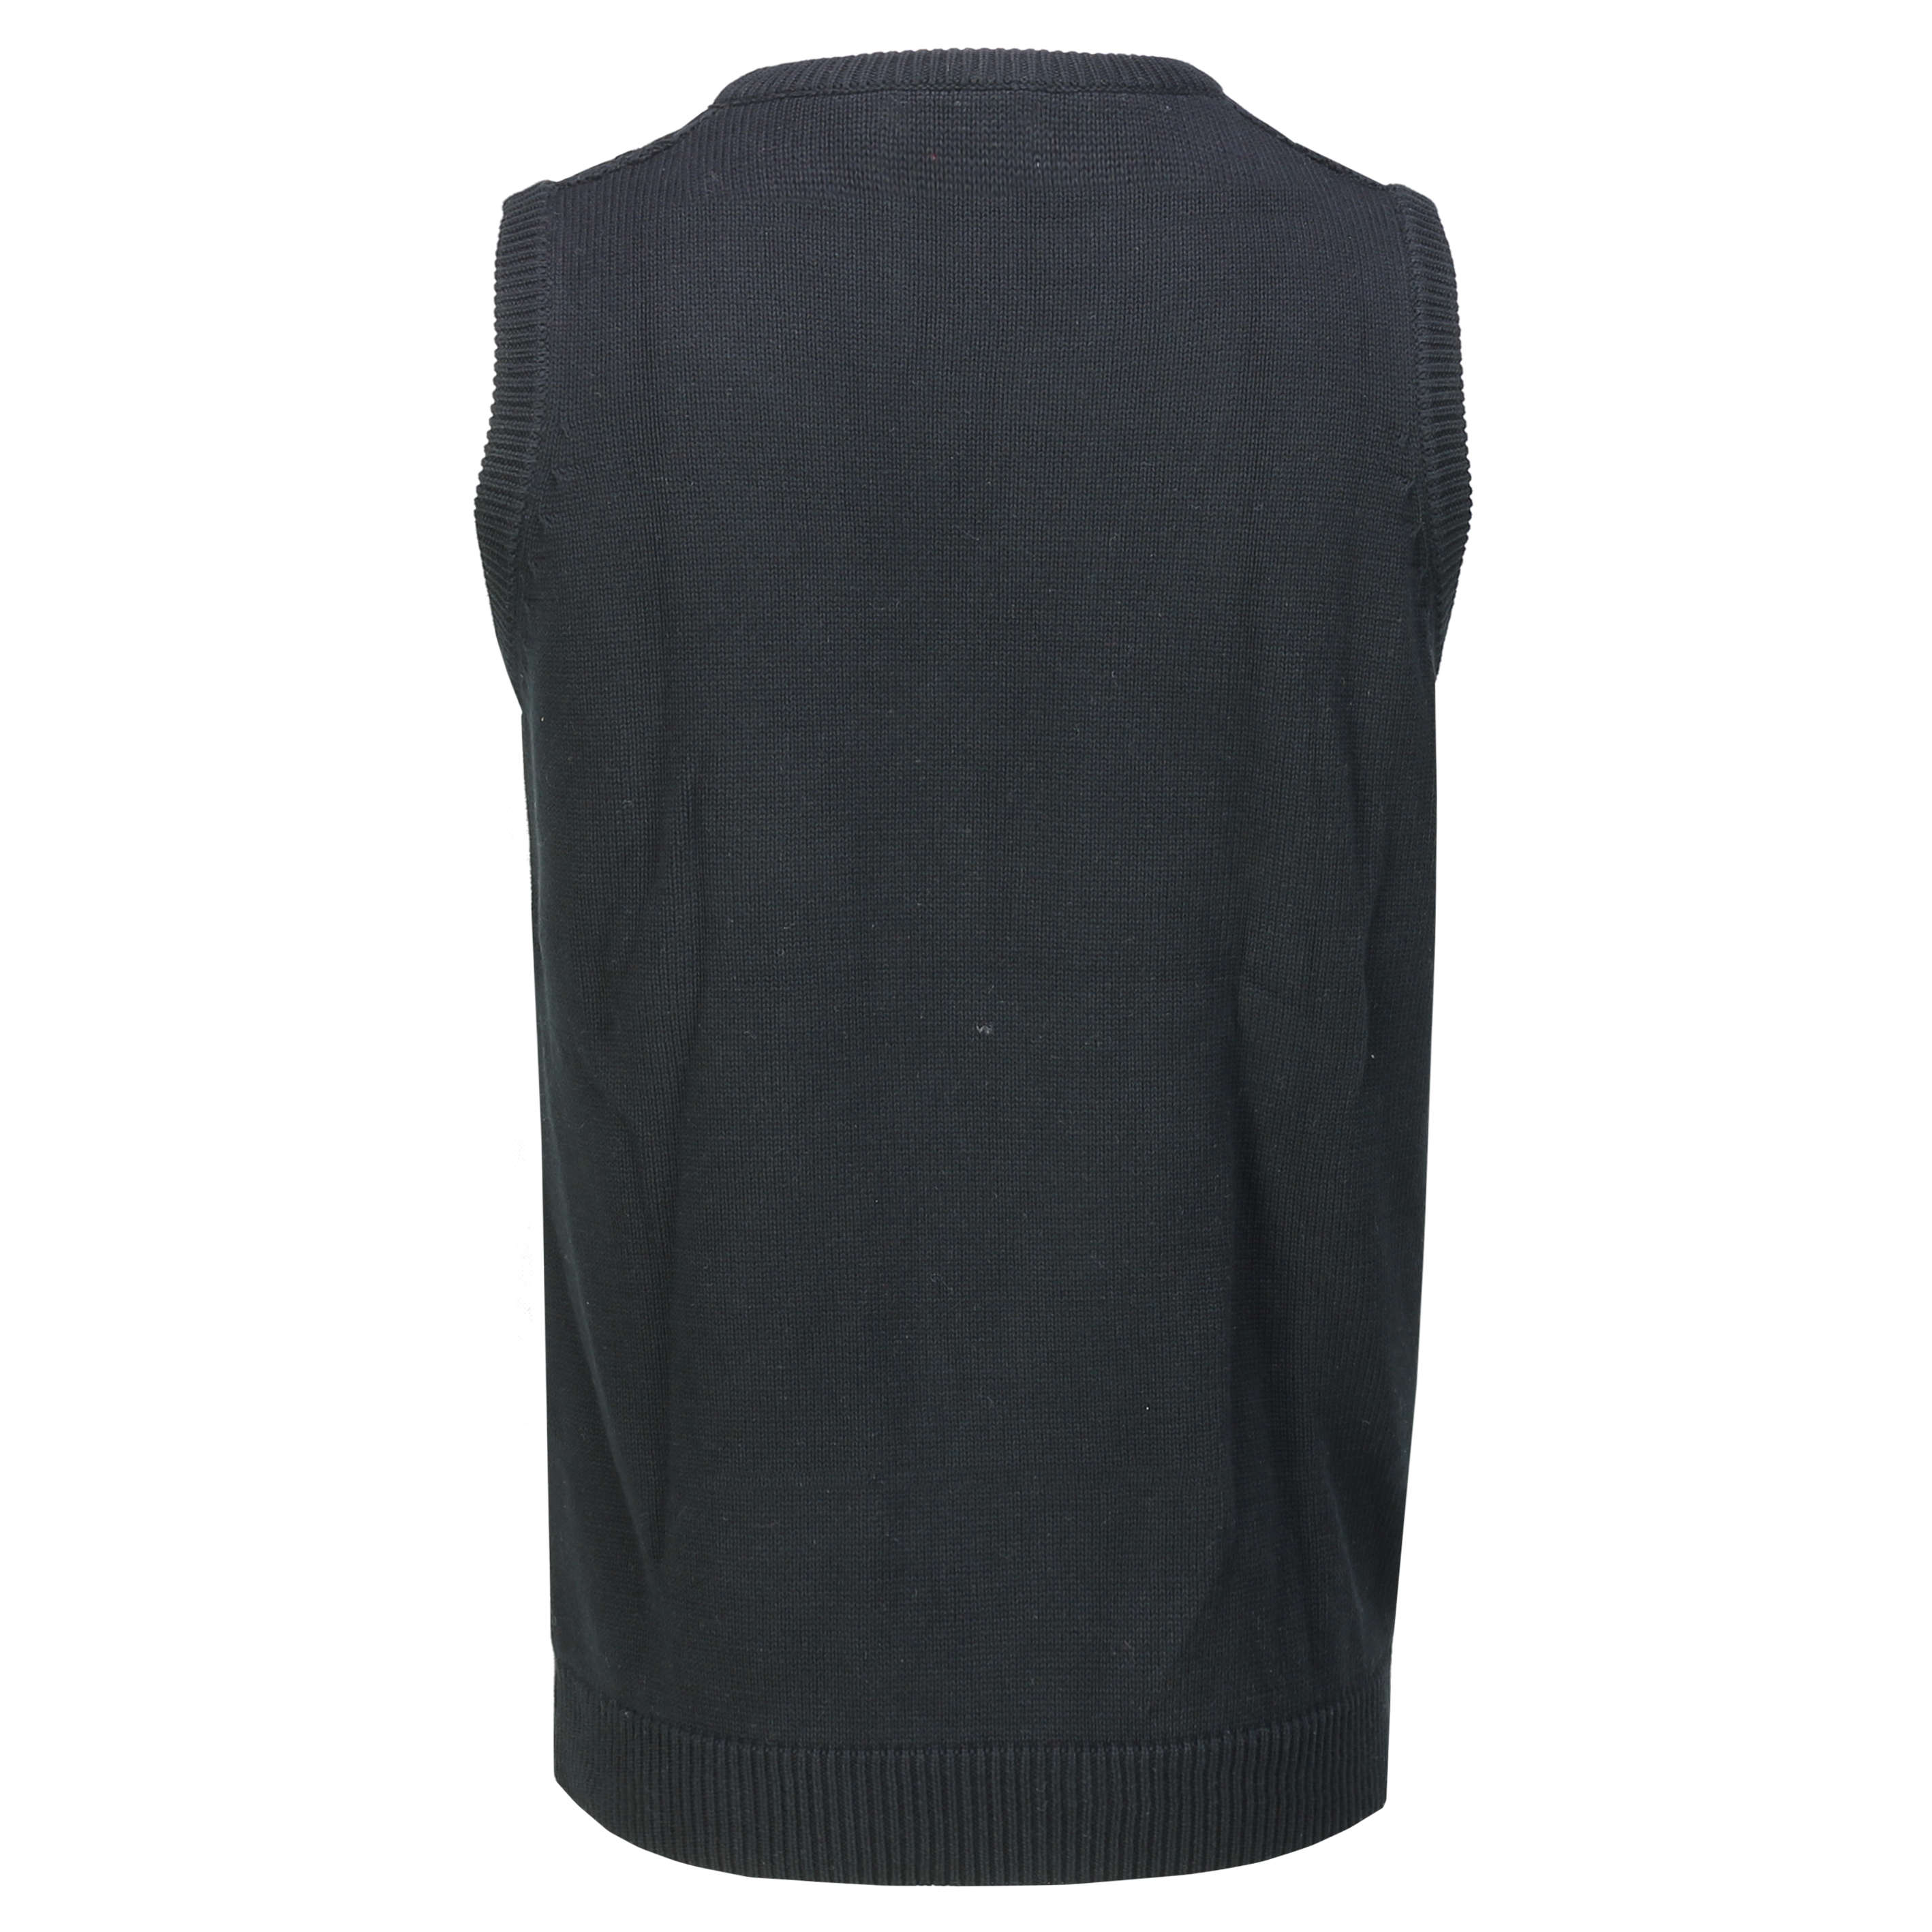 Mens Classic Sleeveless Jumper V Neck Cable Knitted Smart Casual ...